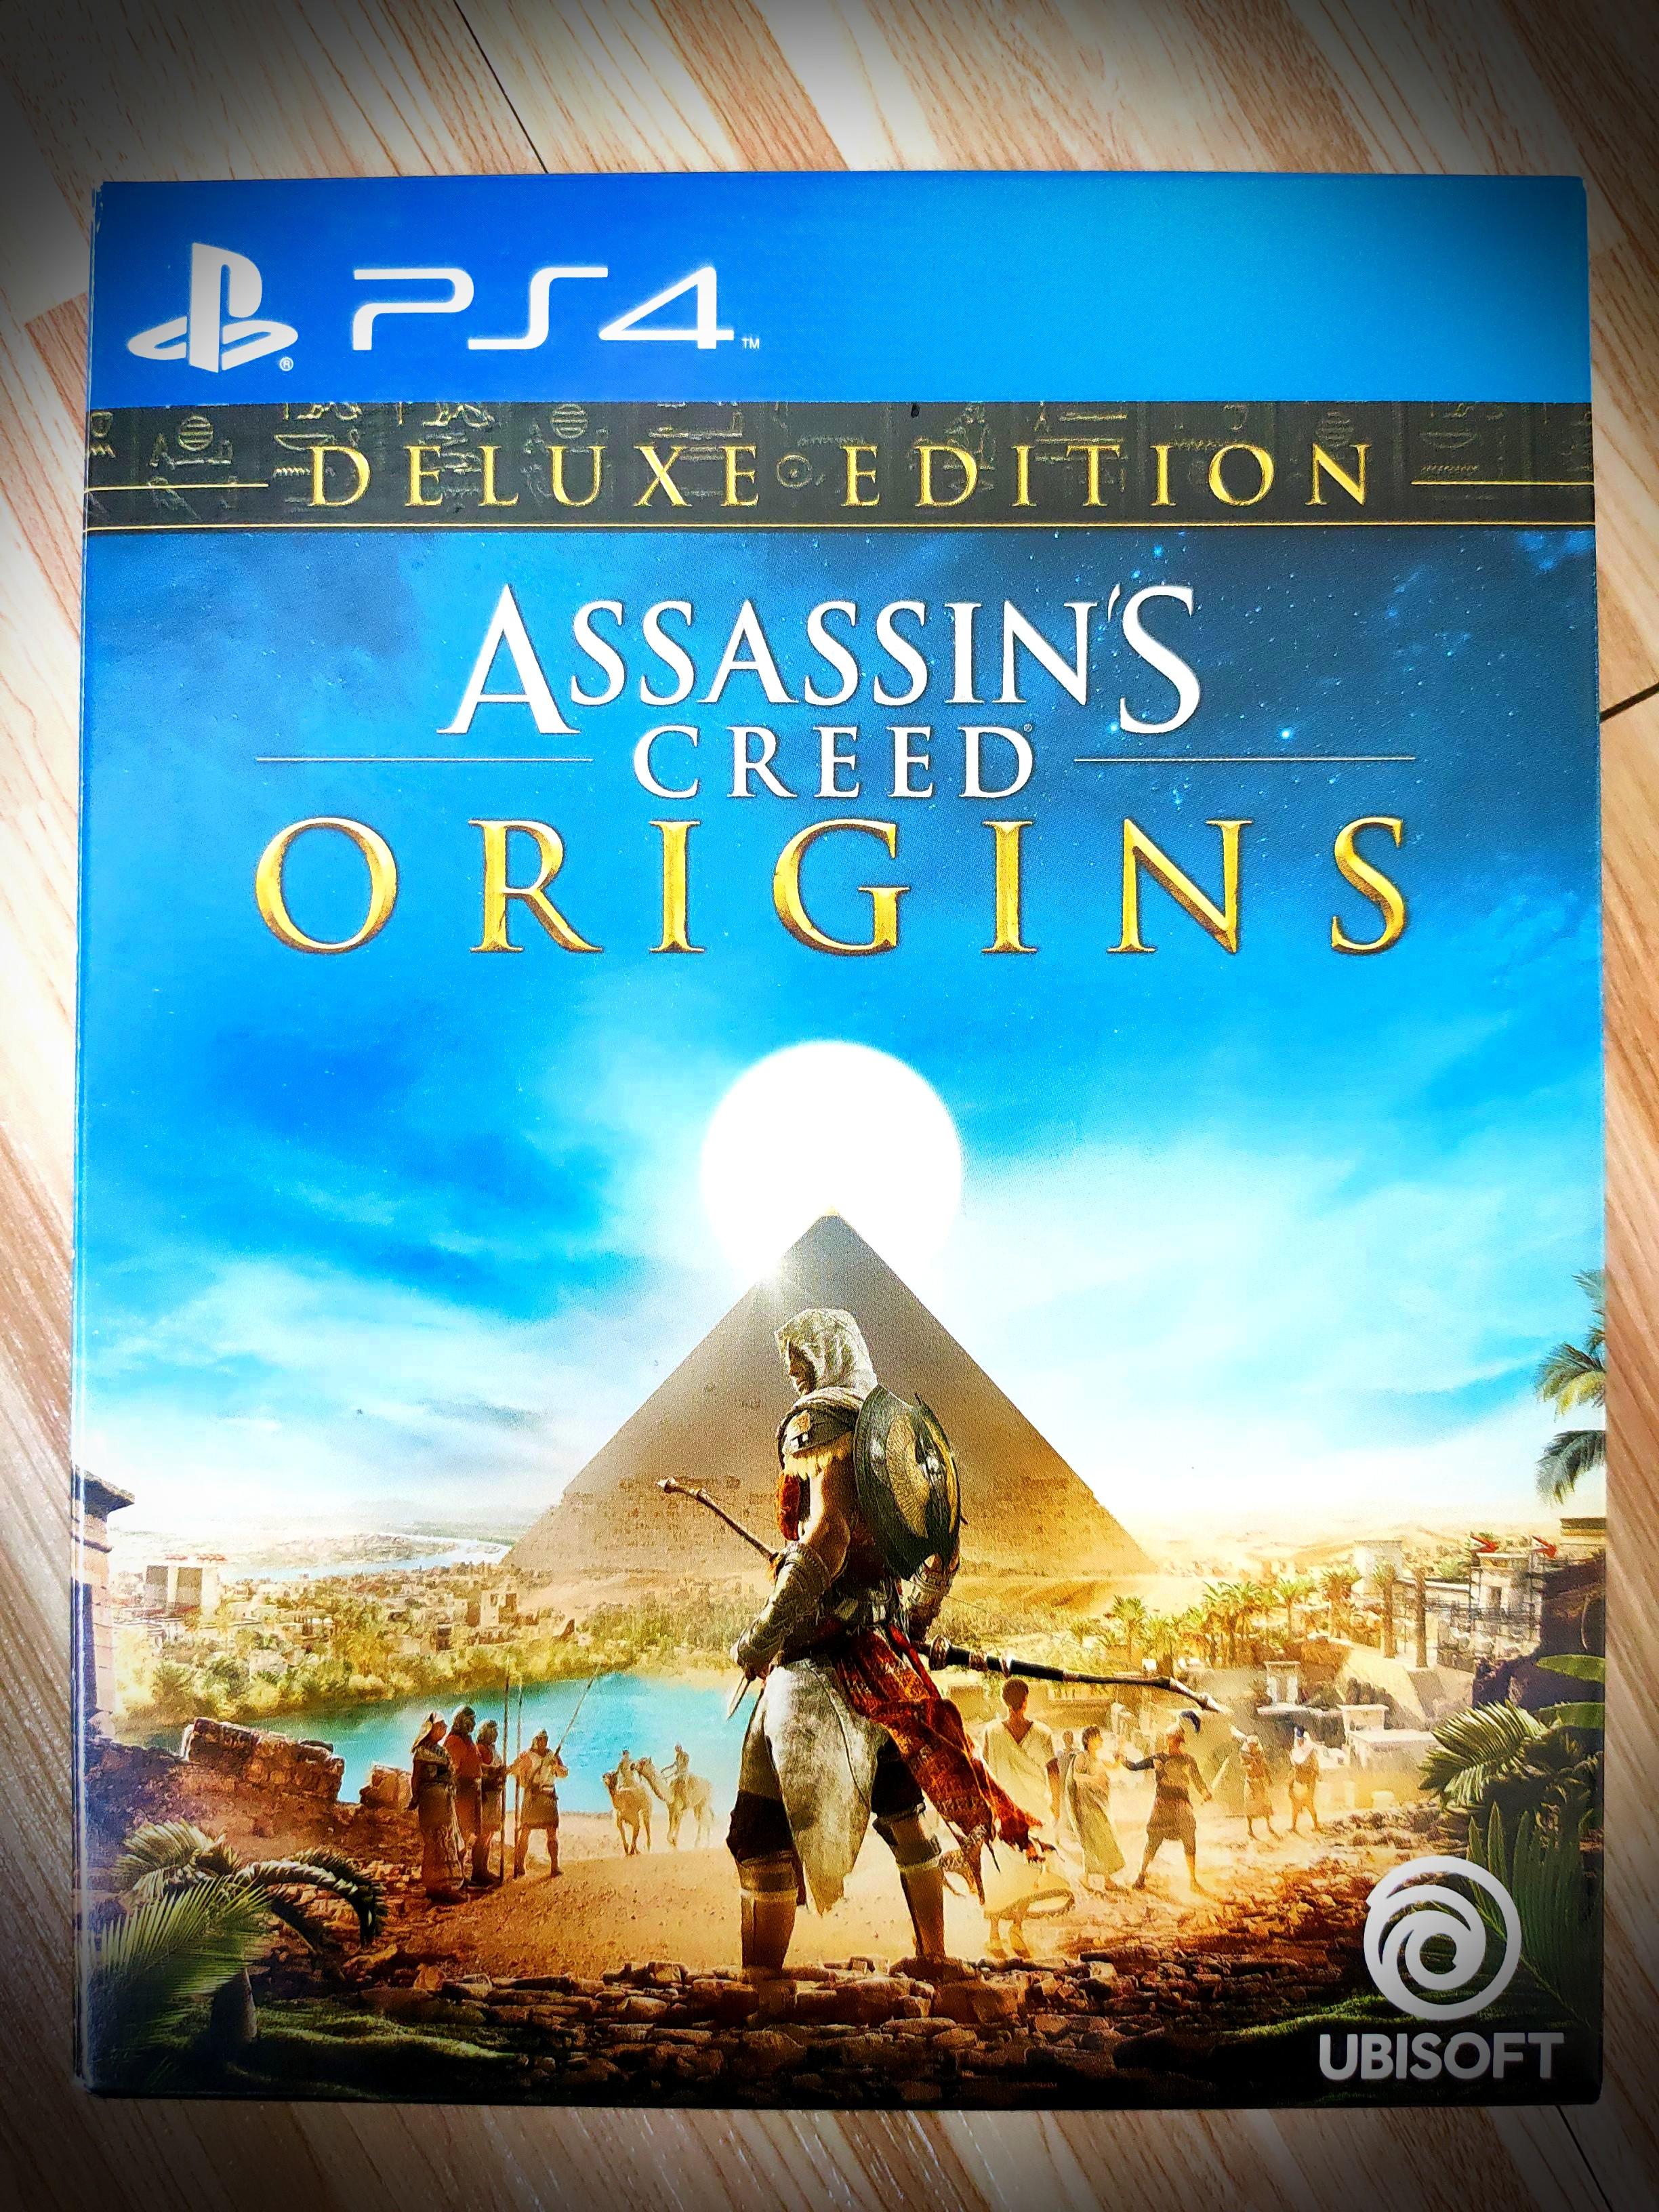 Assassin S Creed Origins Deluxe Edition Toys Games Video Gaming Video Games On Carousell